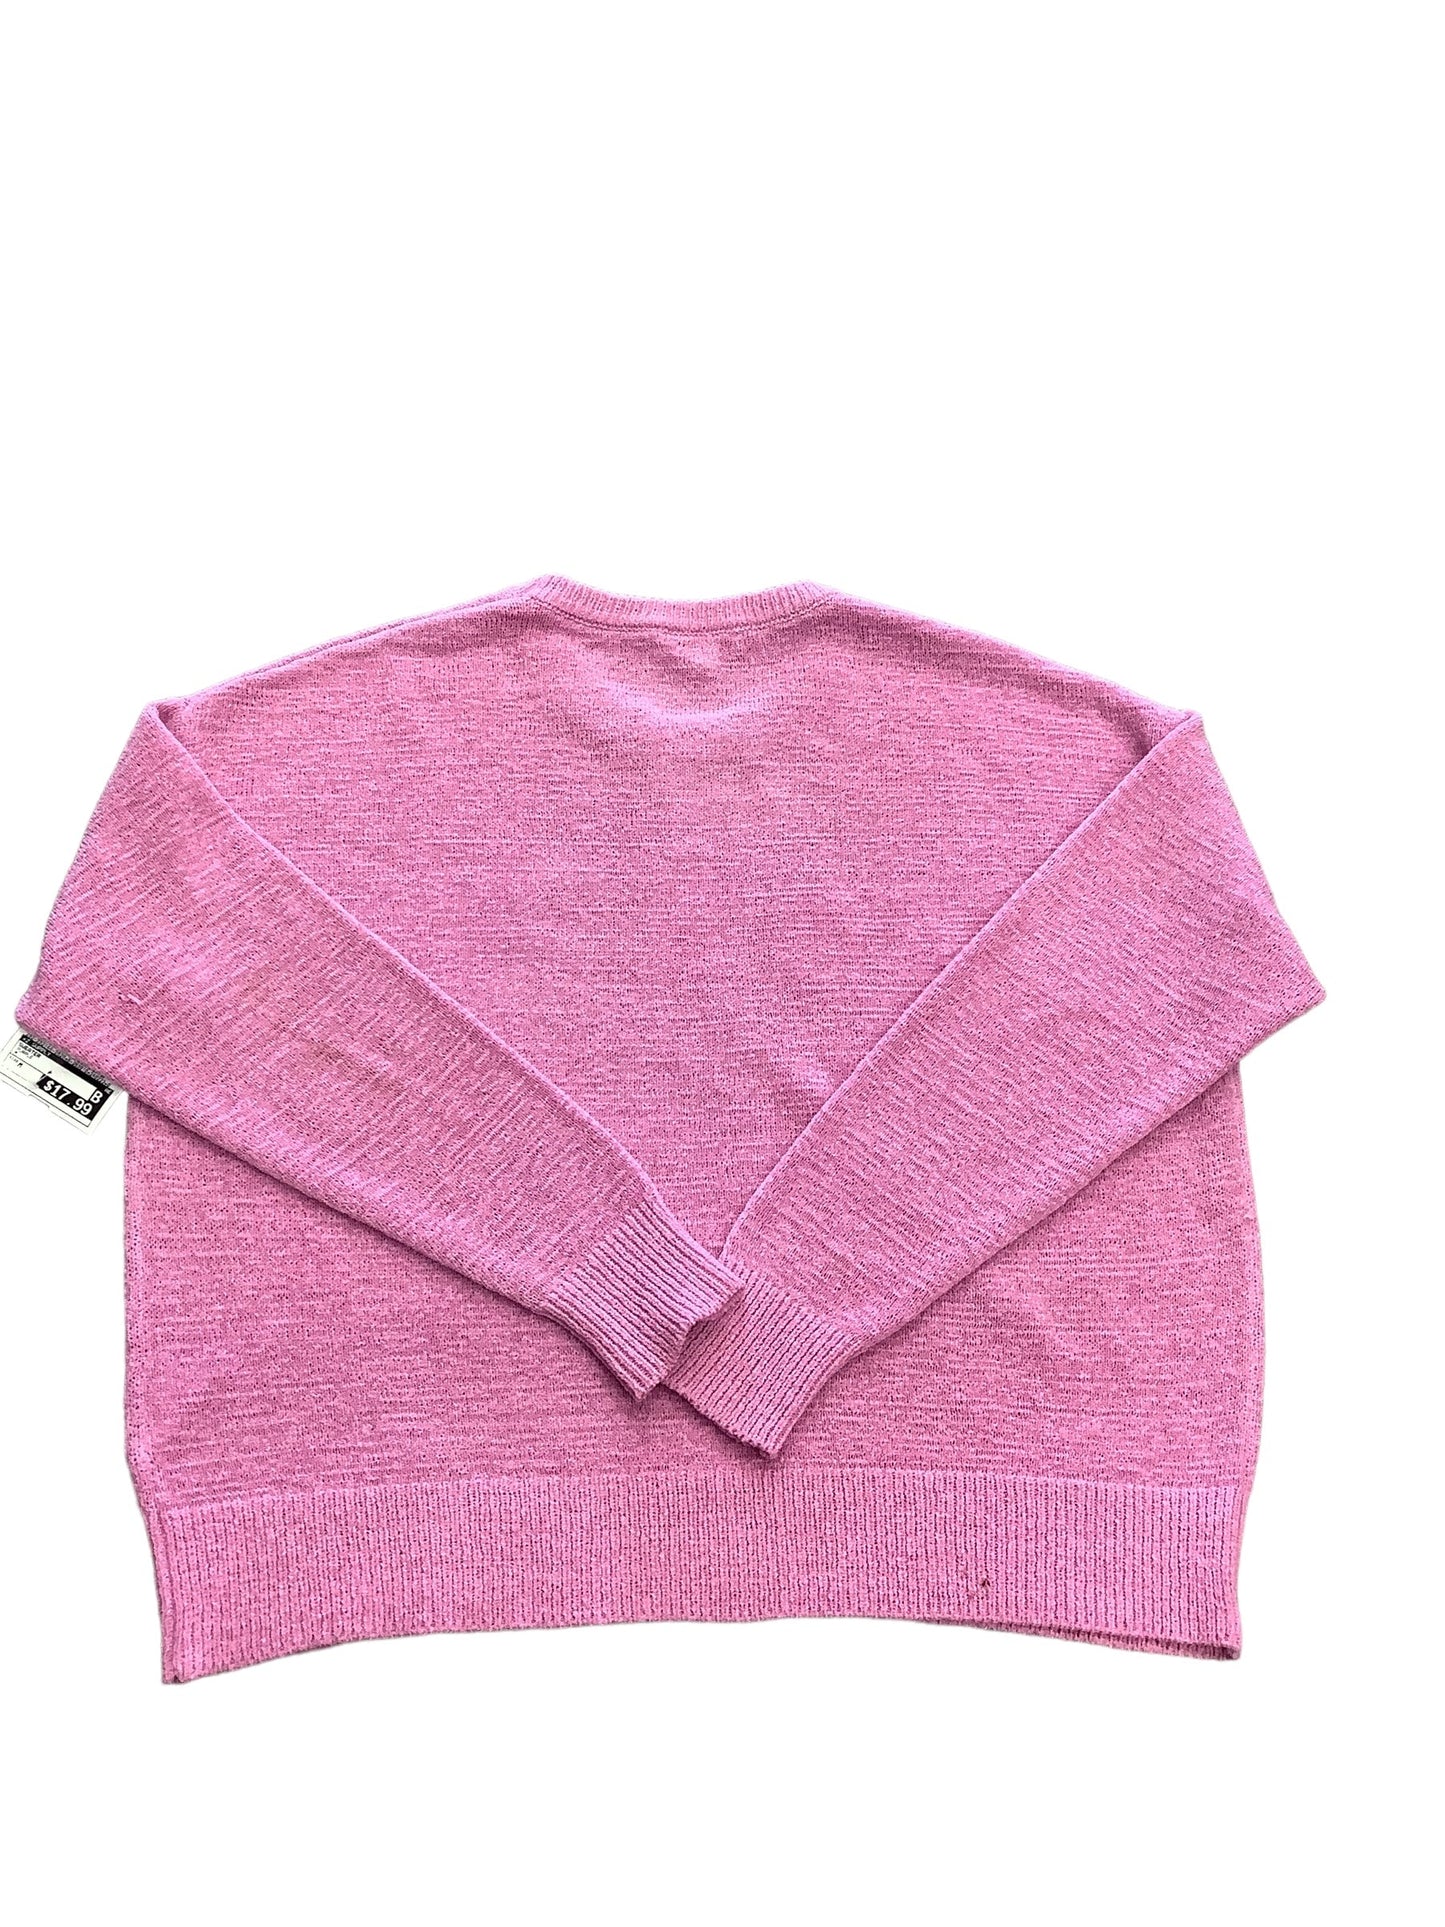 Sweater By Z Supply  Size: M